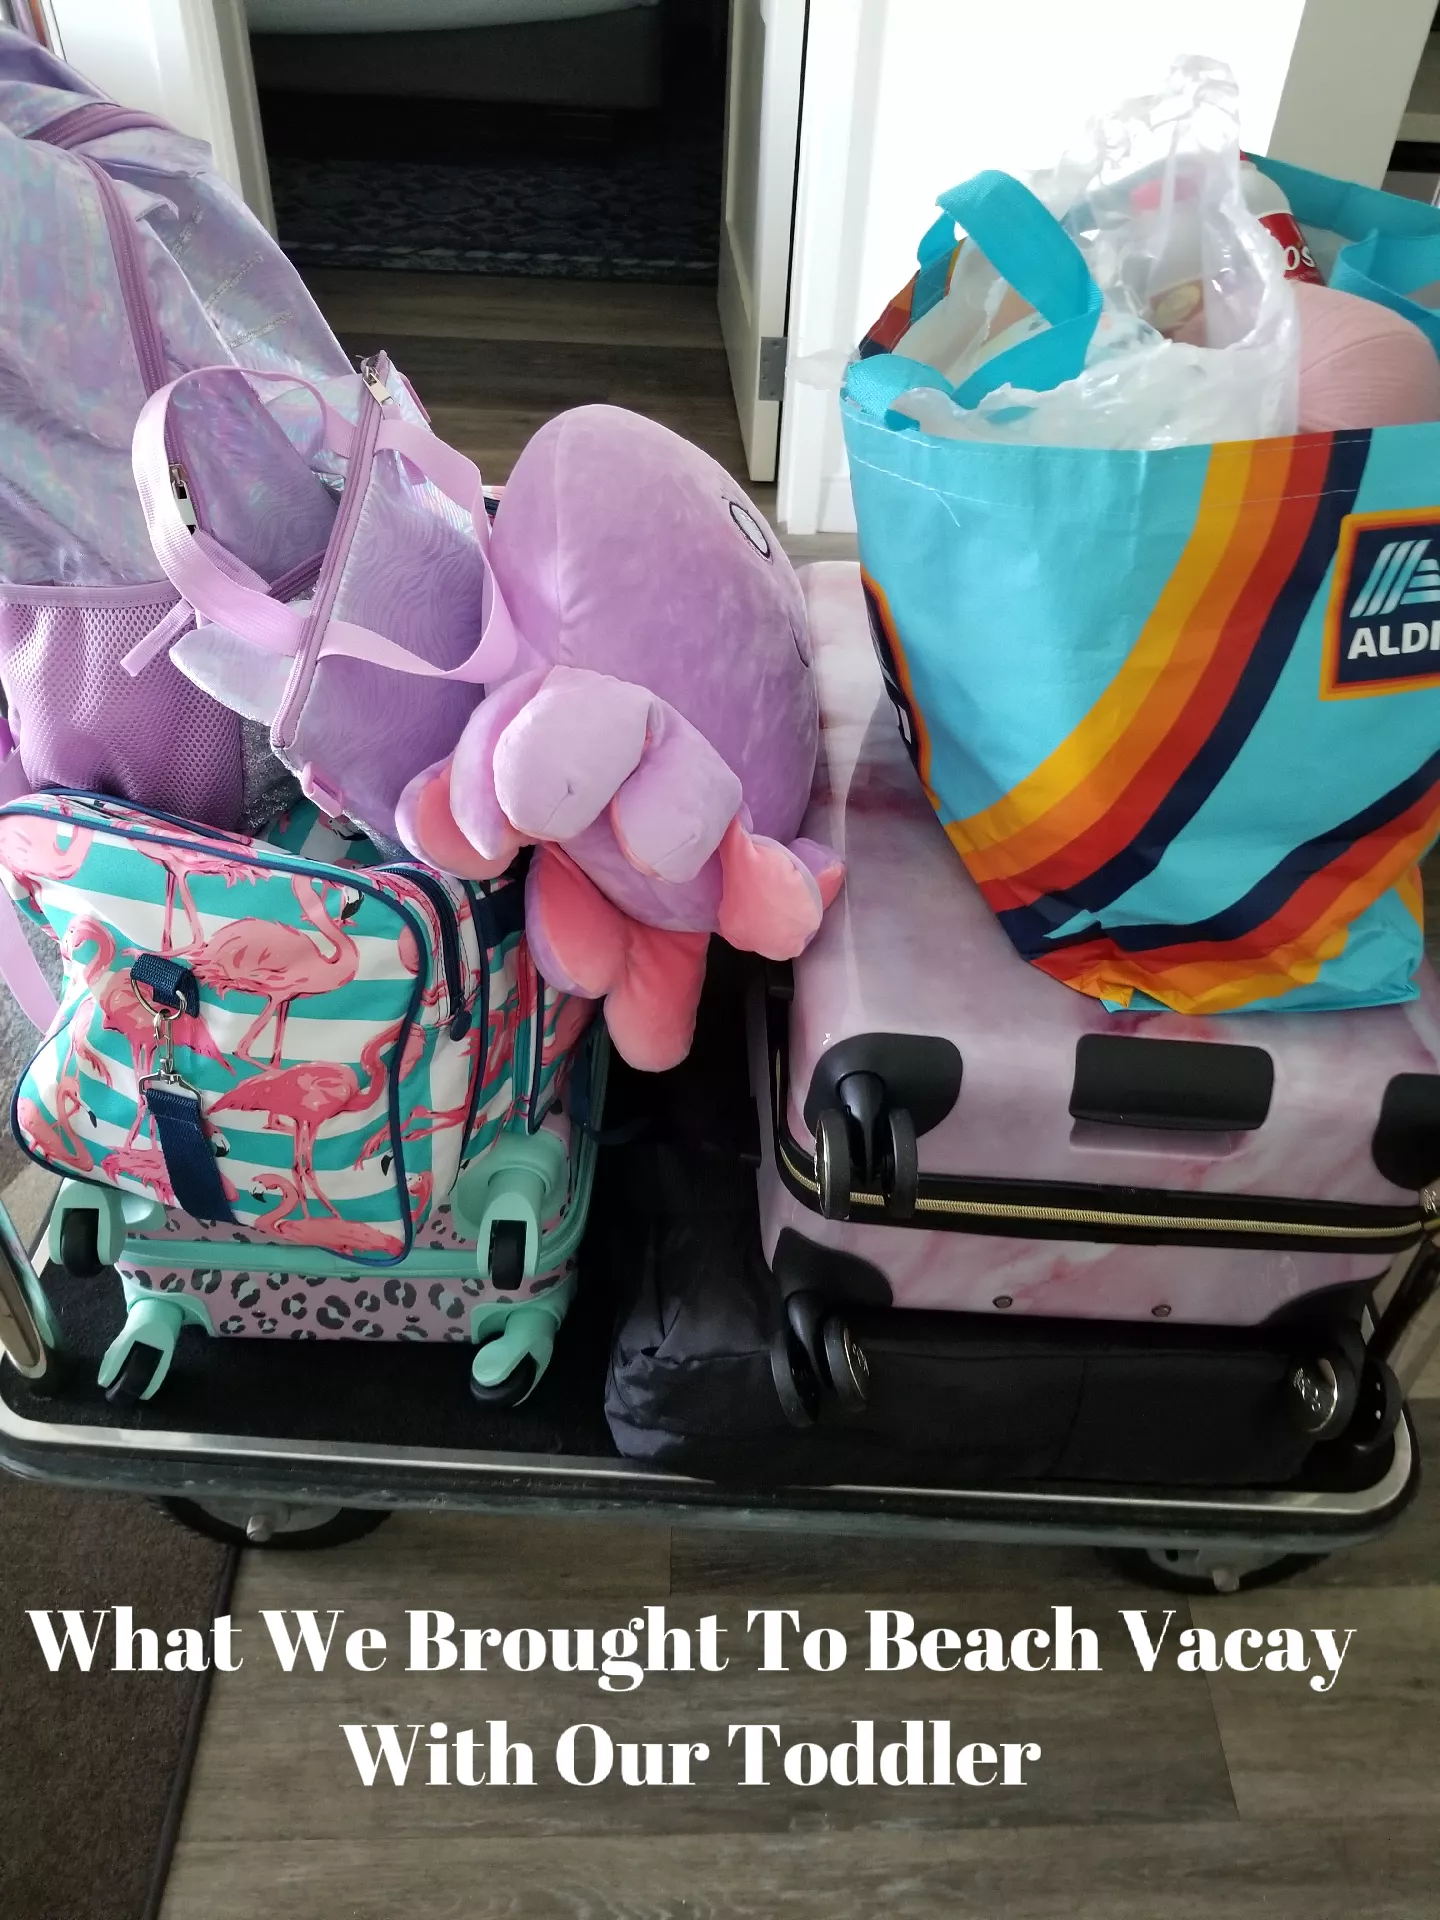 Beach Vacay: What We Brought's images